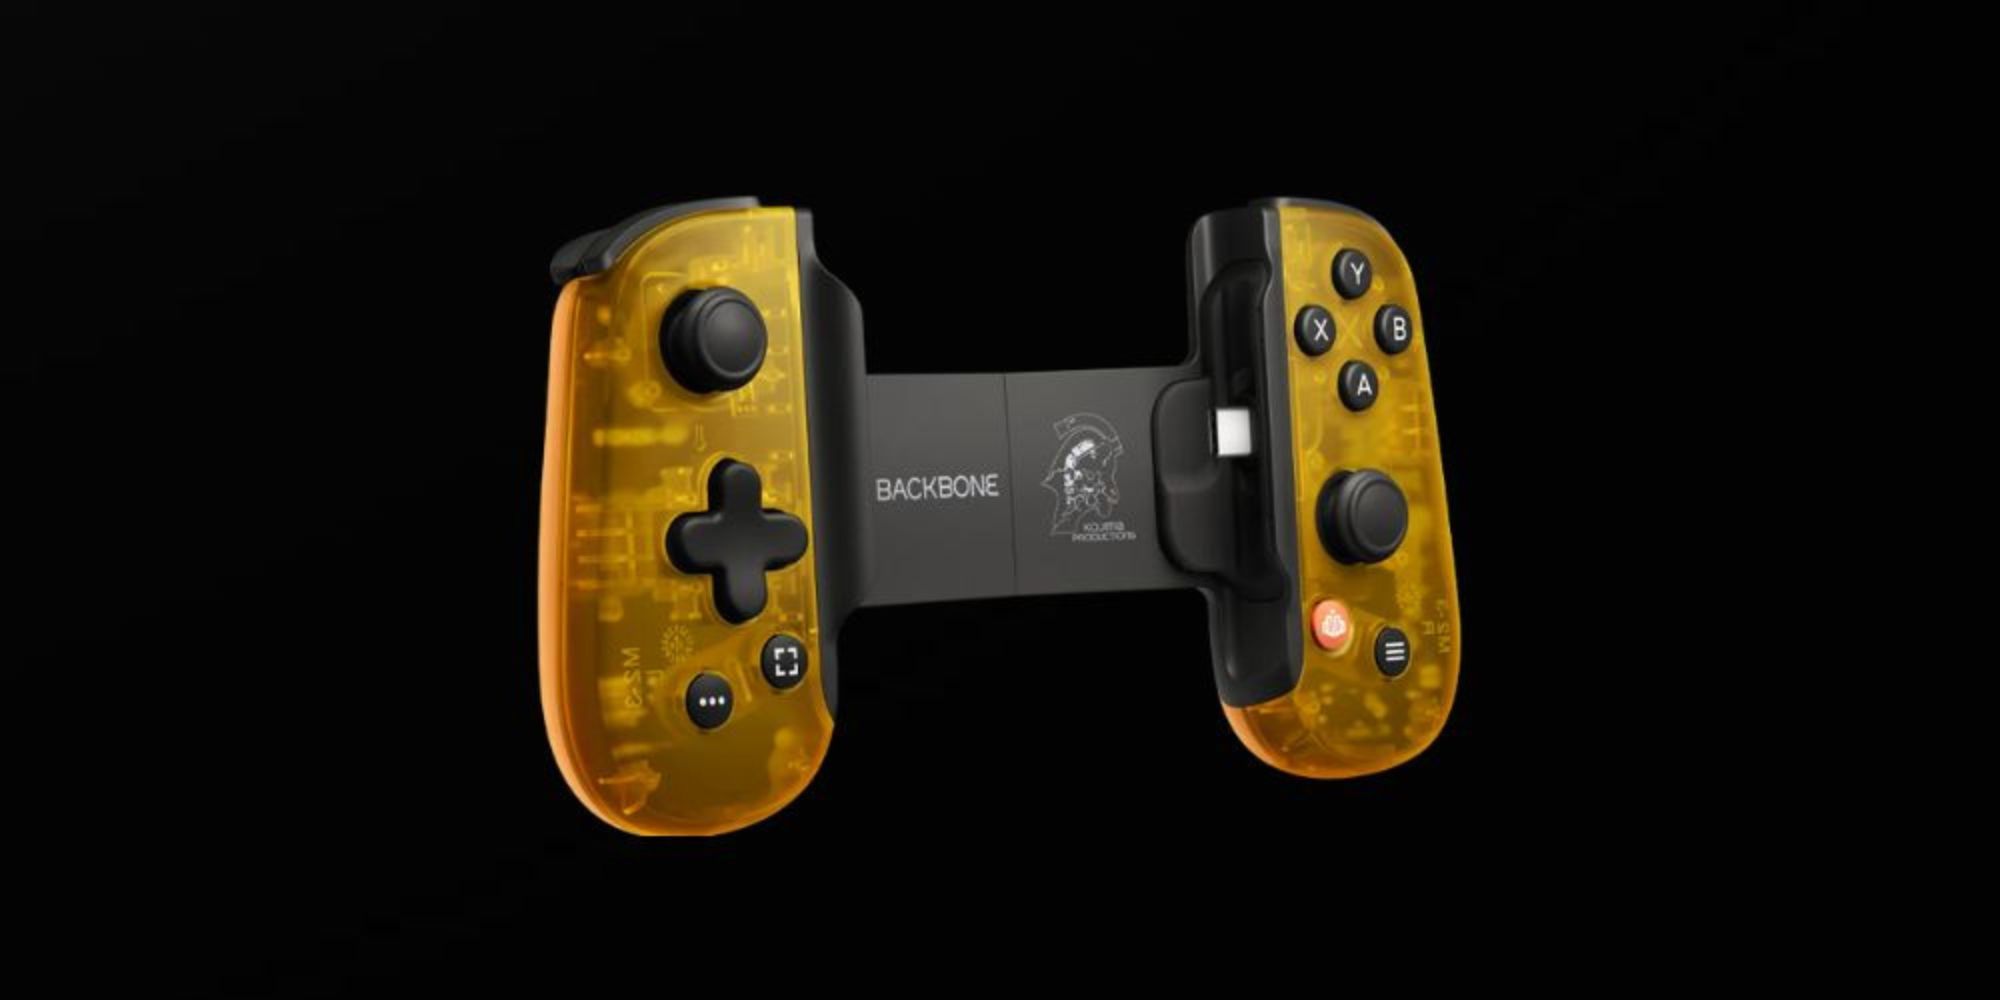 The Limited Edition Death Stranding Backbone Controller Is Now Available For Purchase